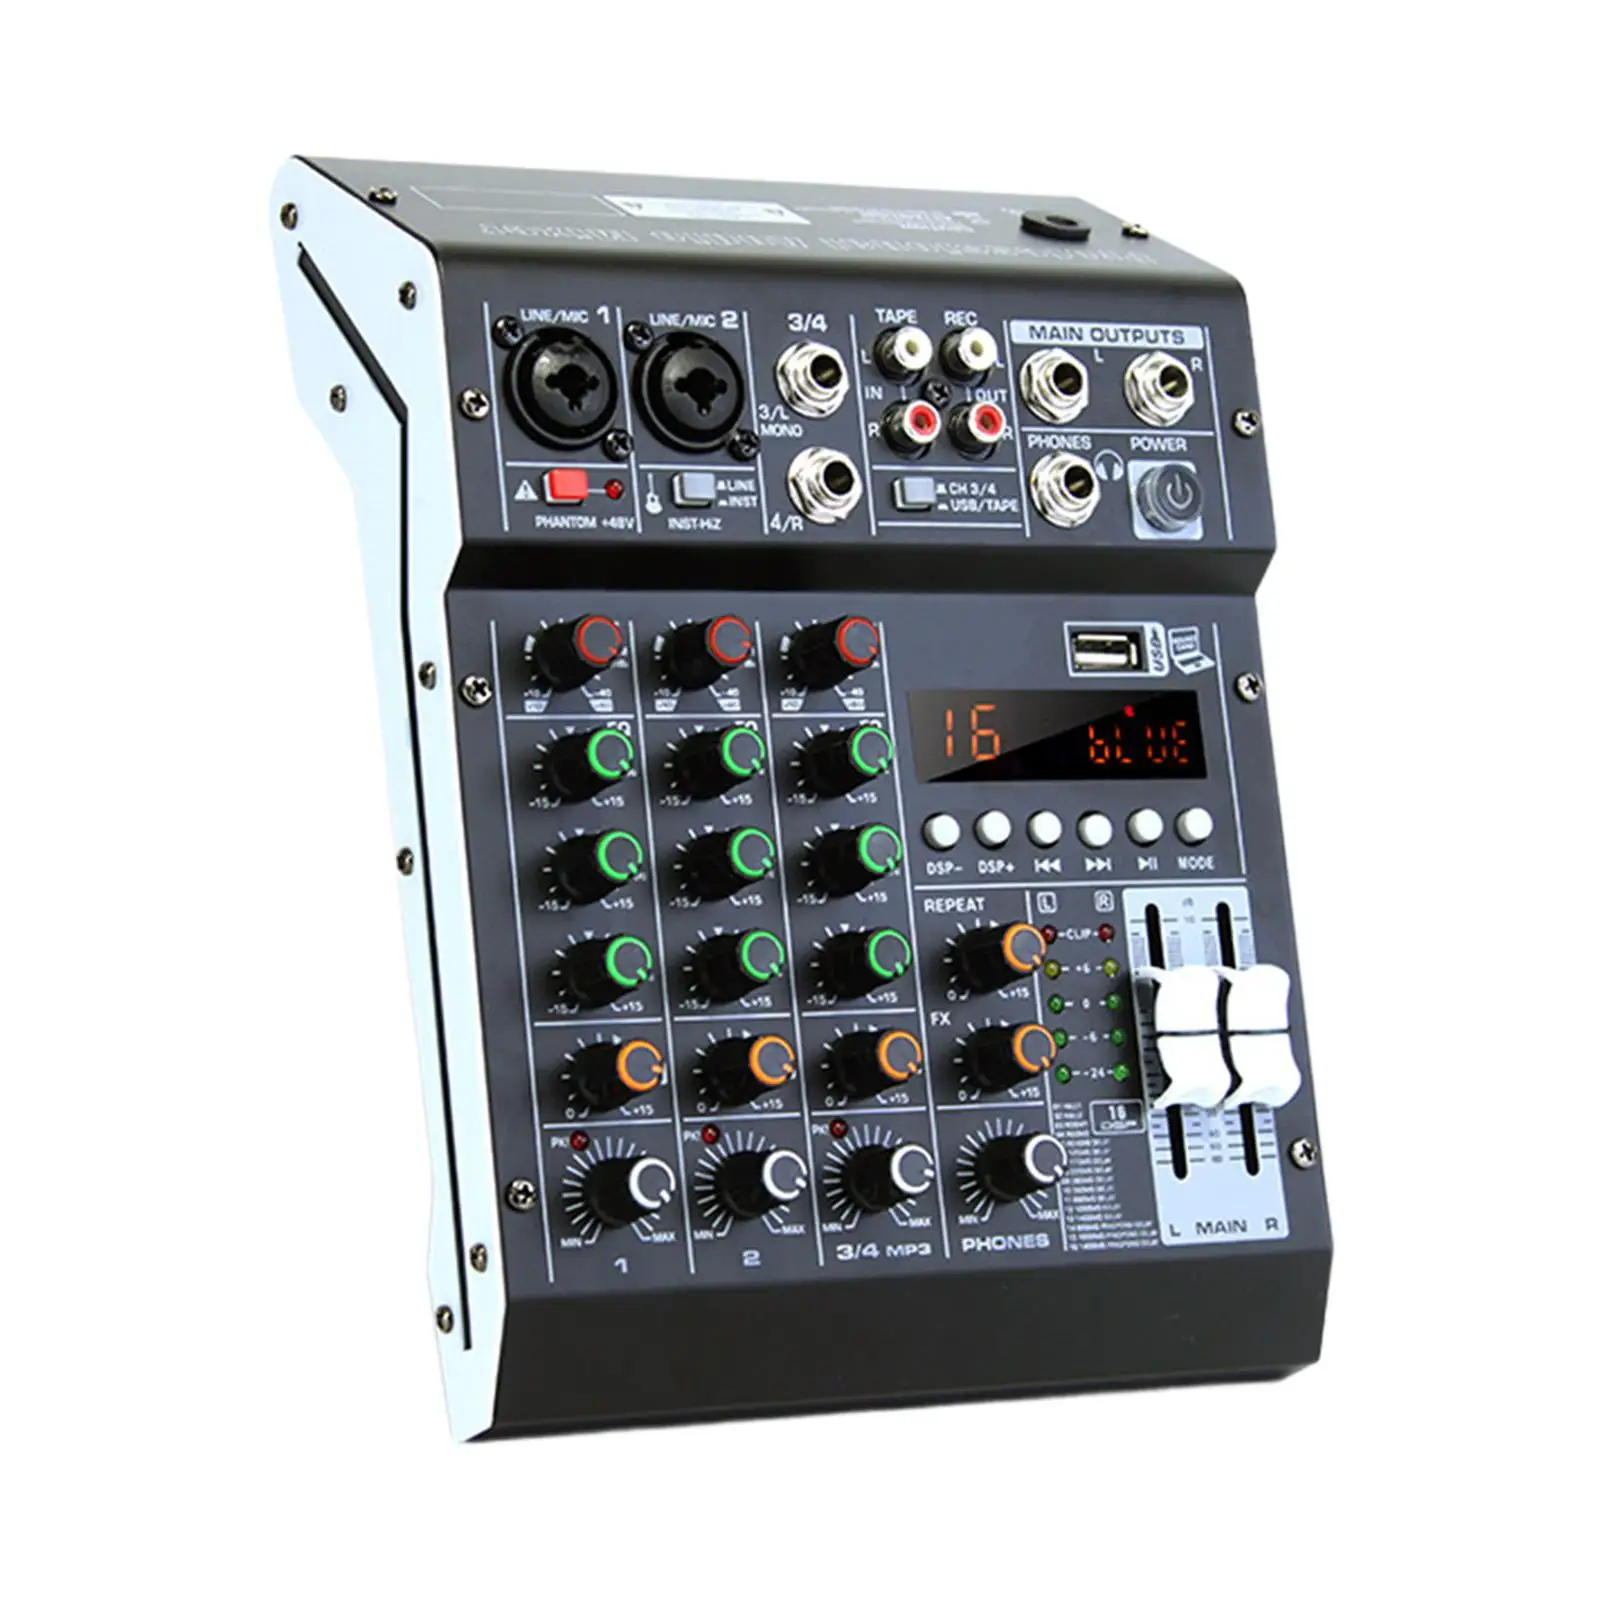 Studio Audio Mixer Build in 16 DSP Effects TP-4M Sound Mixing Console for PC Recording DJ Stage Family KTV Campus Speech Meeting